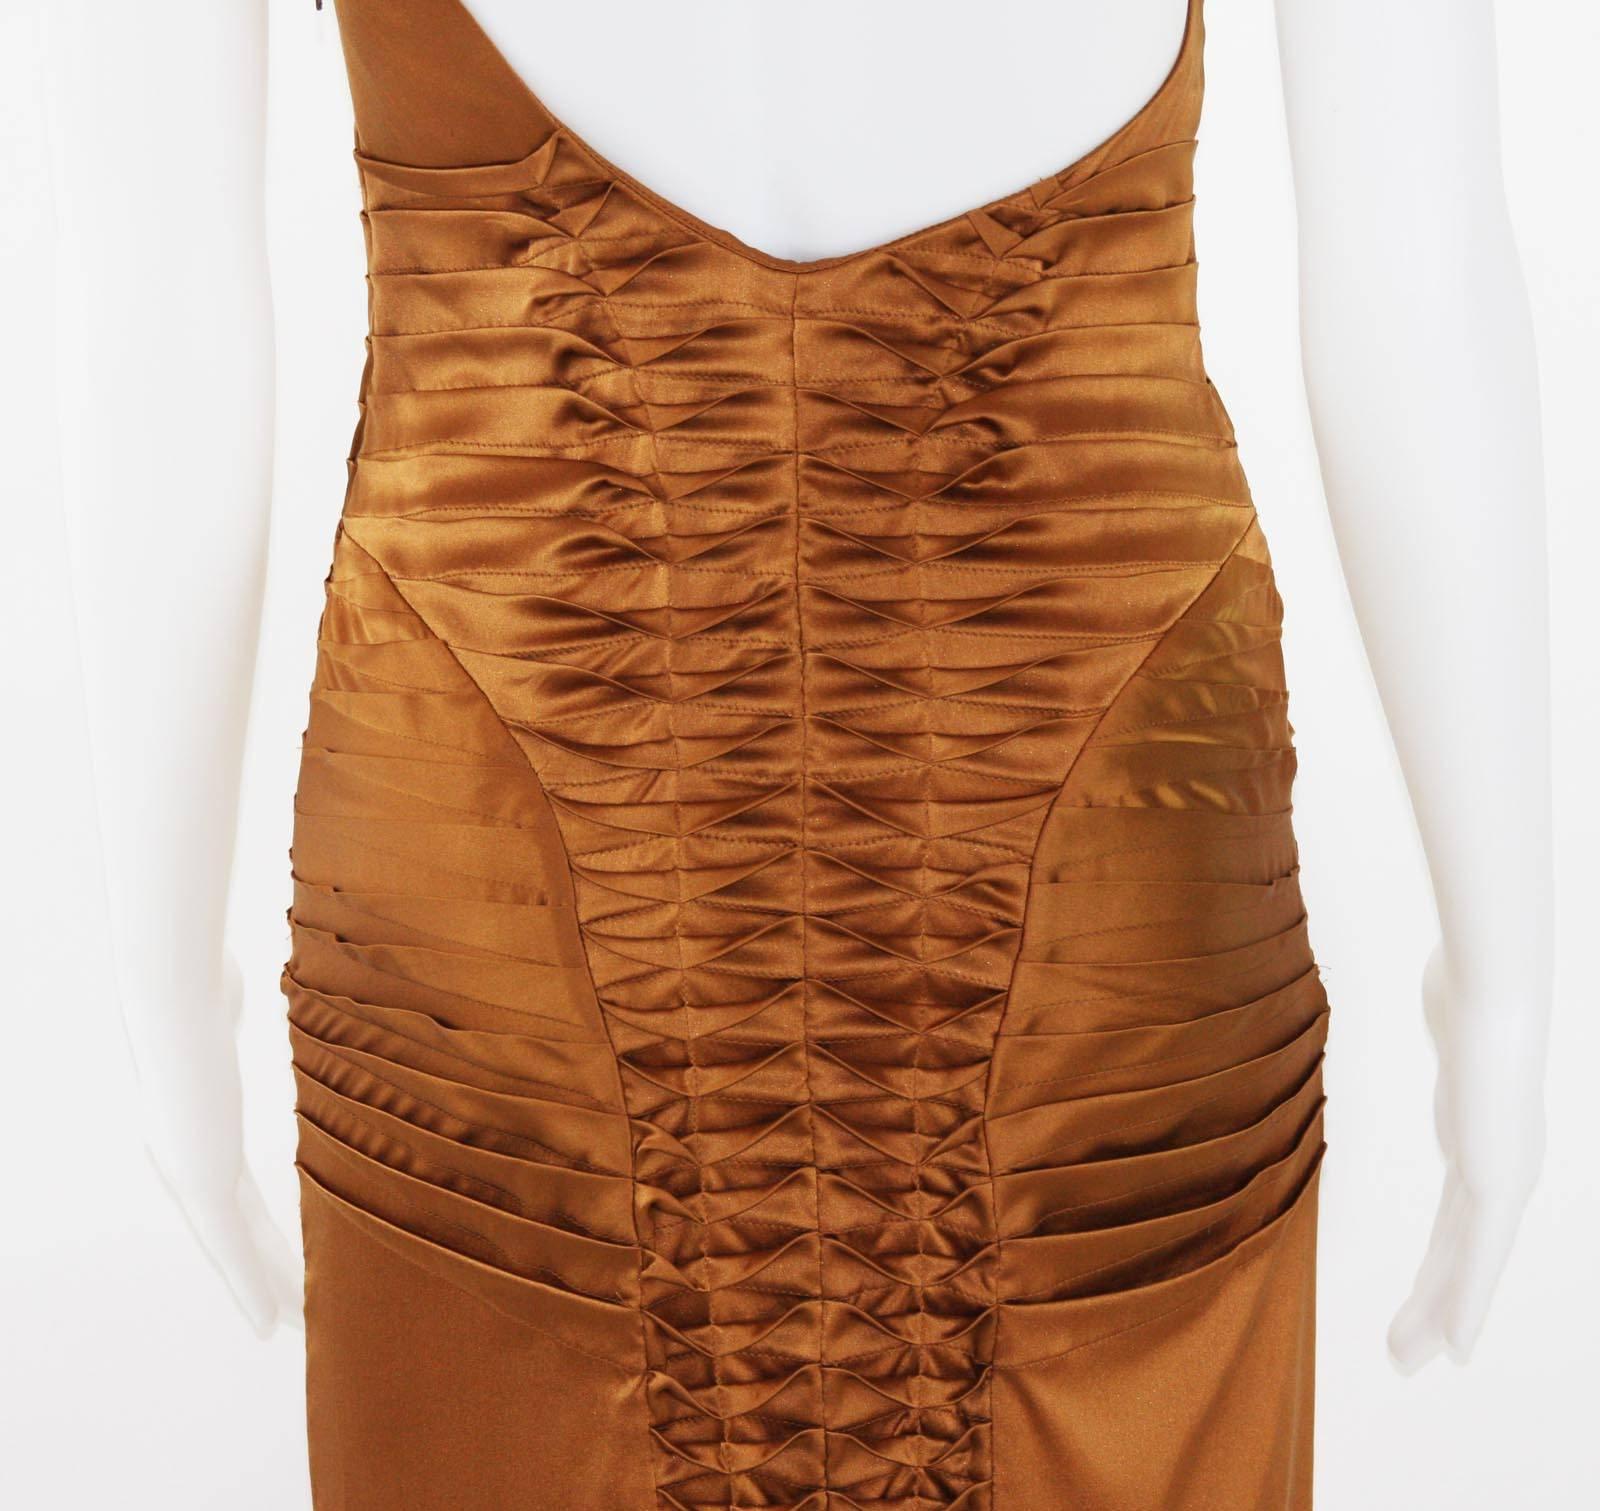 Tom Ford for Gucci 2003 Collection Silk Cooper Cocktail Dress 40 - US 4 For Sale 3